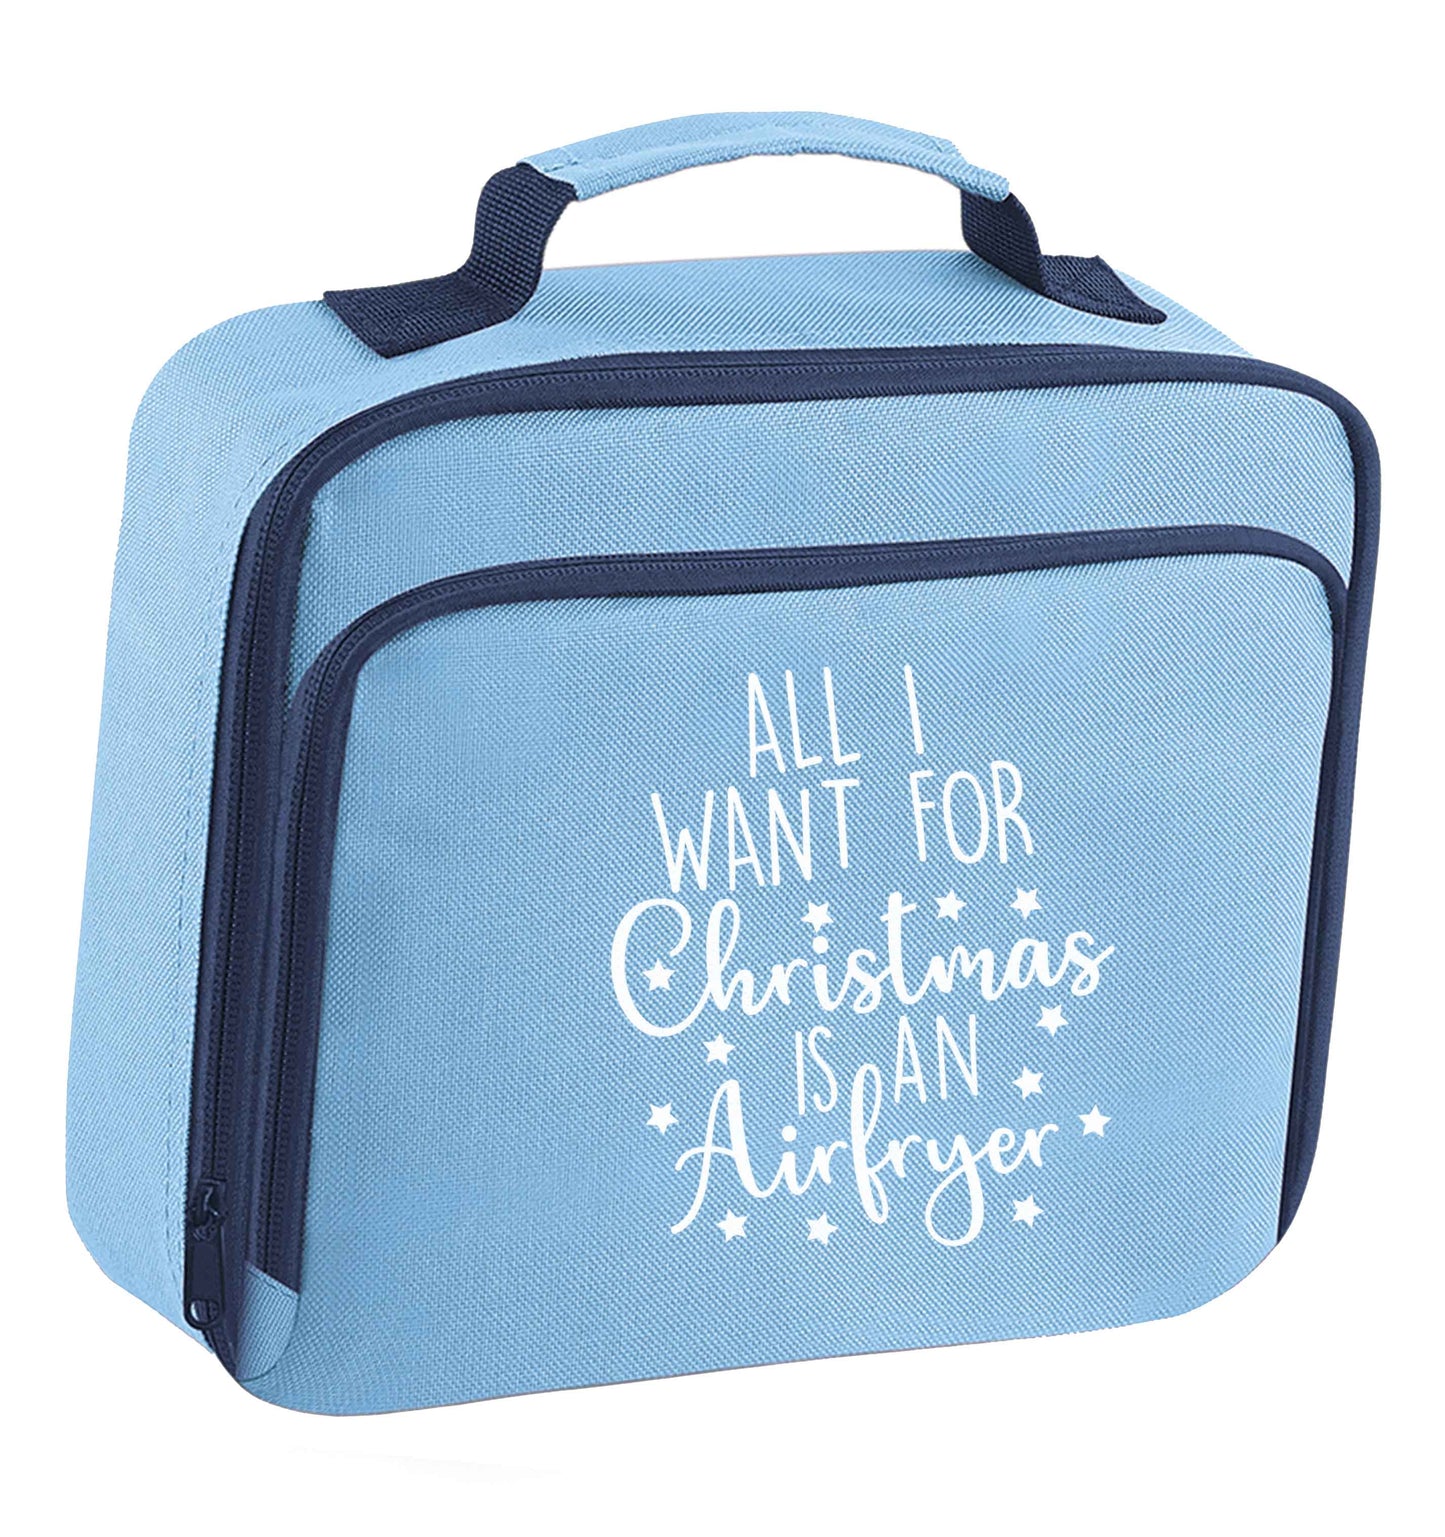 All I want for Christmas is an airfryerinsulated blue lunch bag cooler